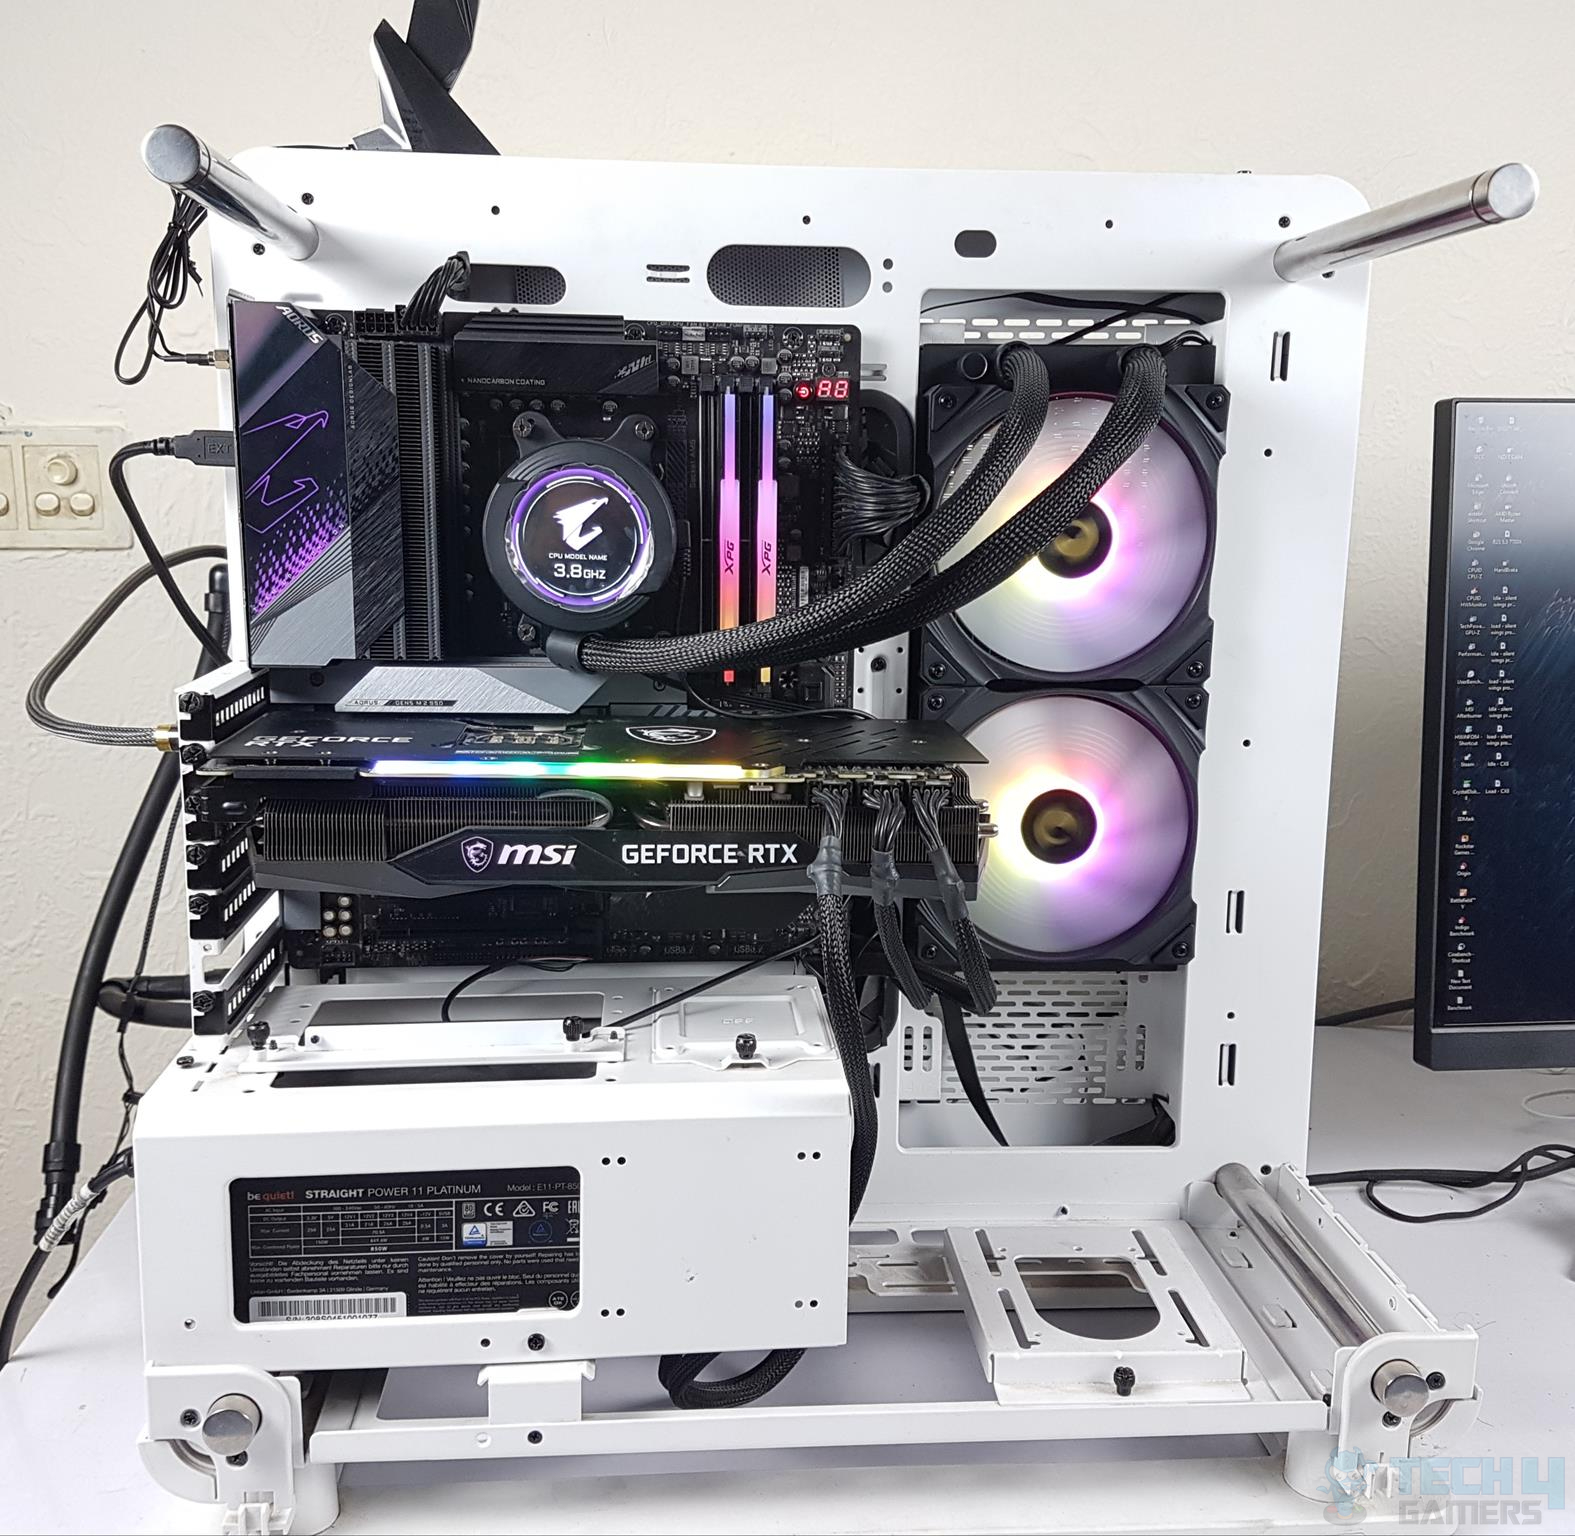 AORUS WATERFORCE X 280 The complete testing rig in all its glory